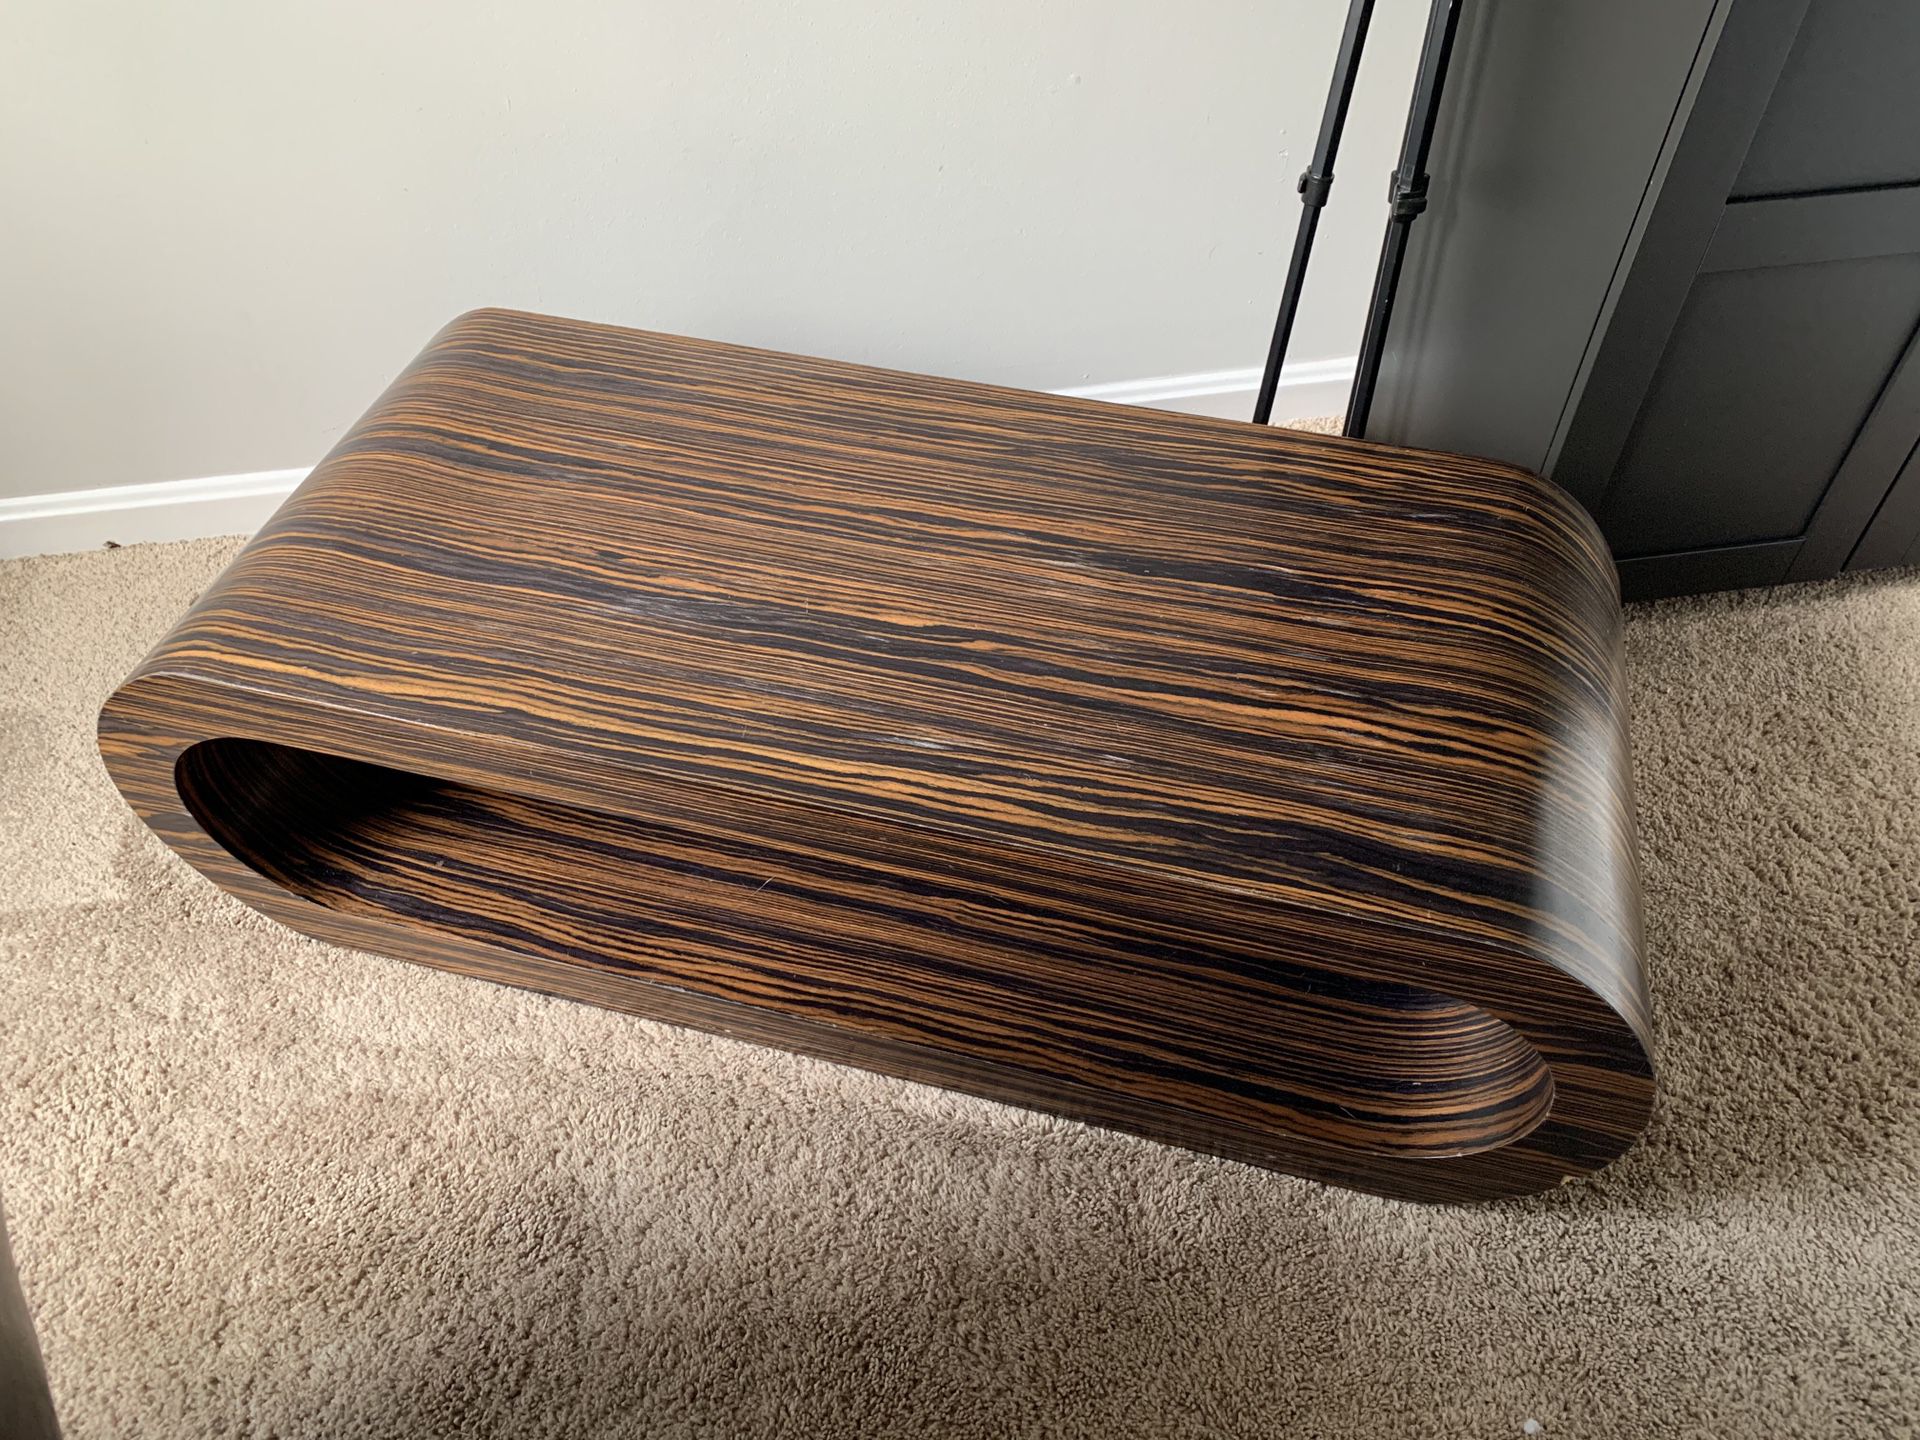 Cool streaked wood coffee table with modern design